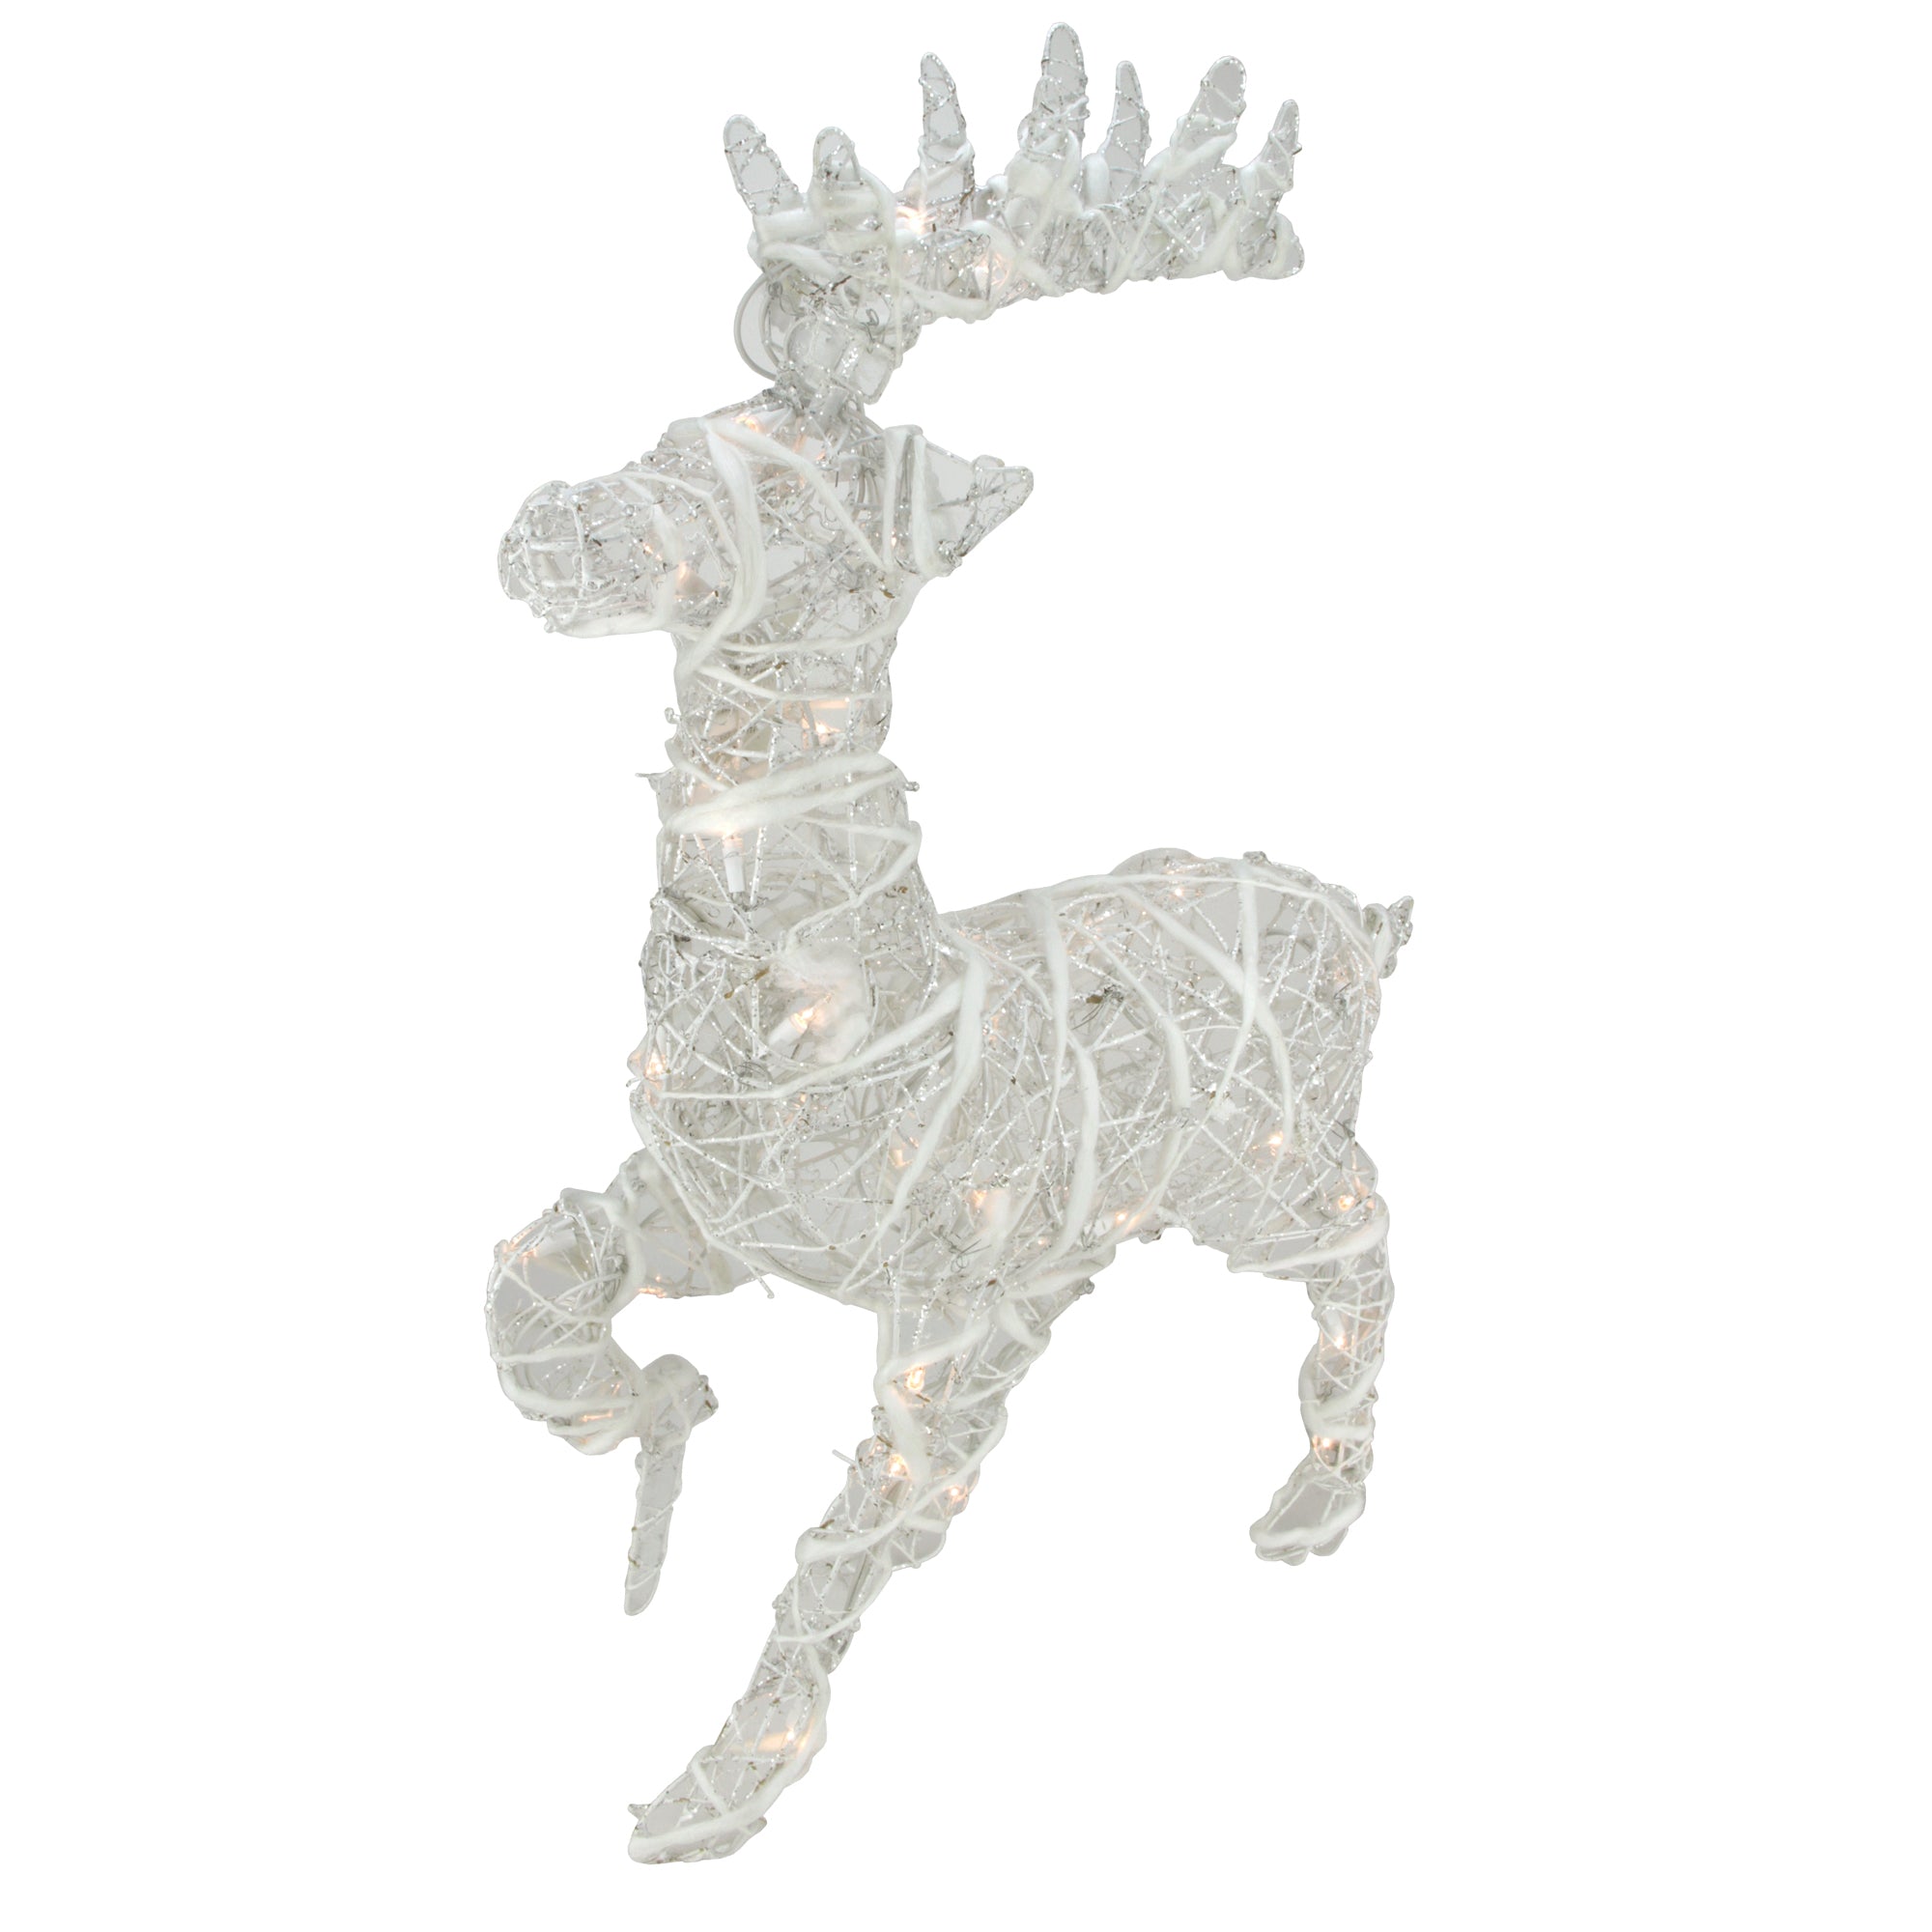 30" Lighted White Glittered Rattan Reindeer Outdoor Christmas Decoration